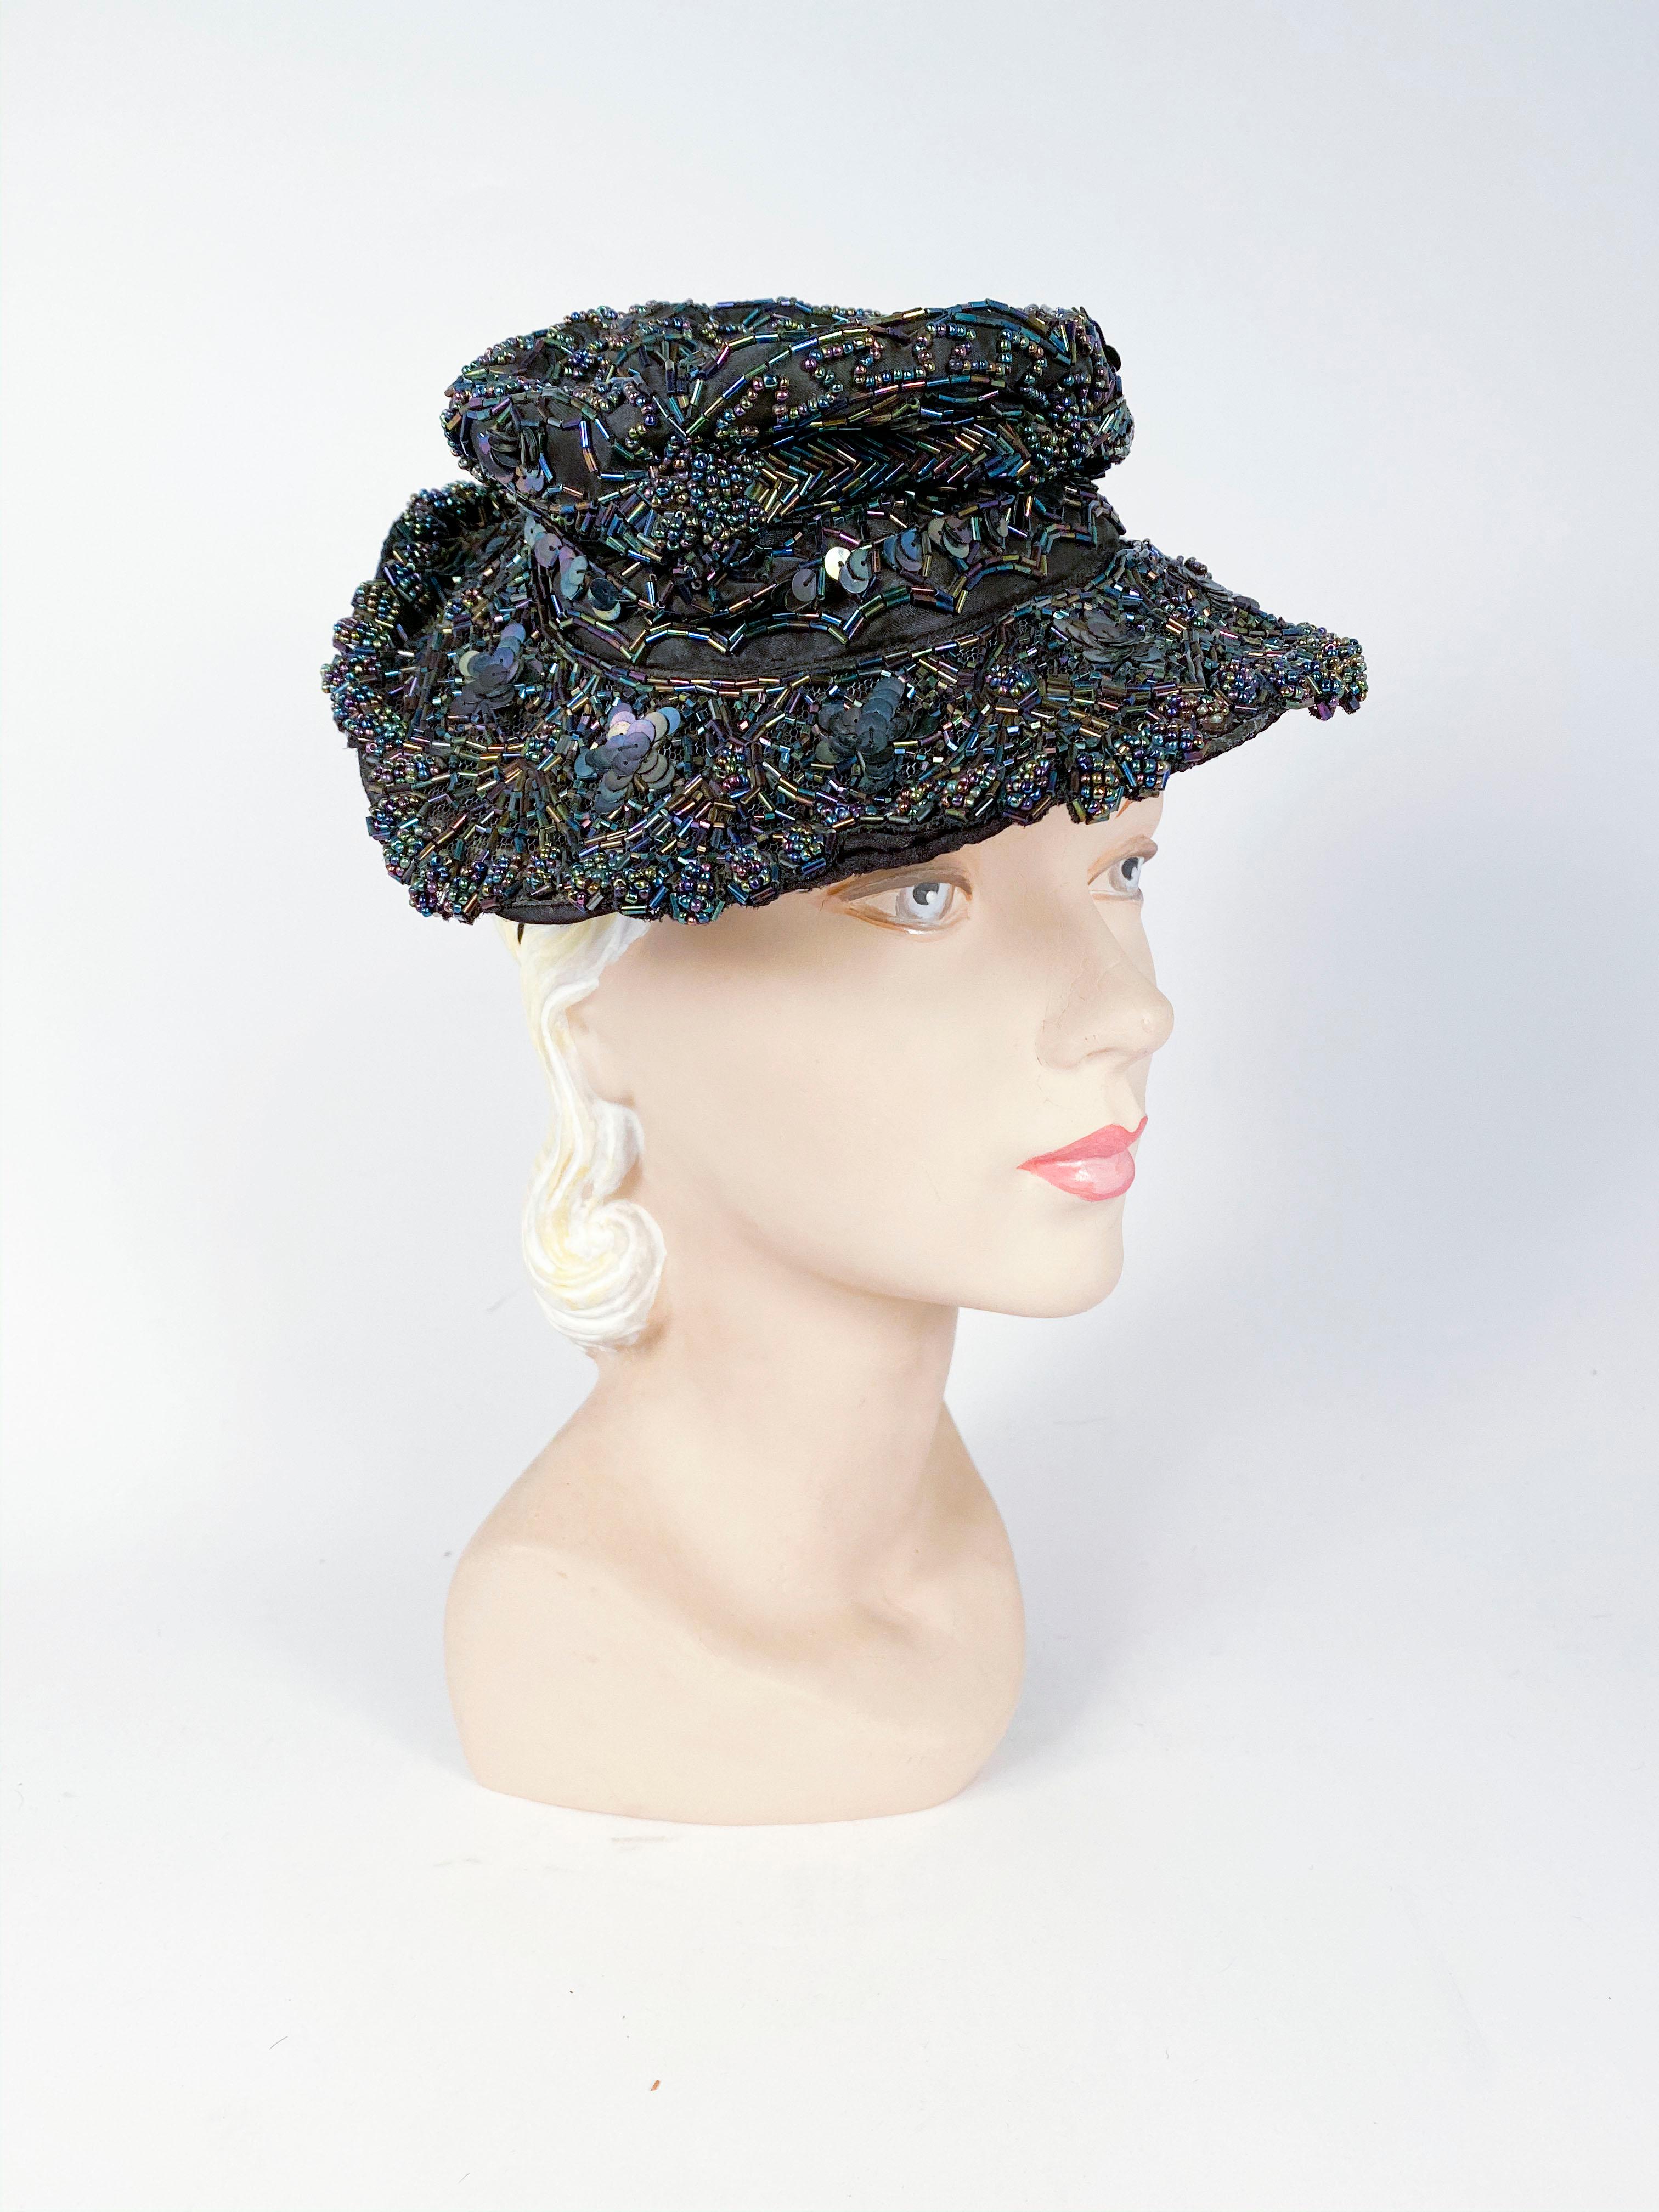 1940s Navy toy hat encased with navy iridescent beading and is to be worn perched on top of the head with the crown unstructured.